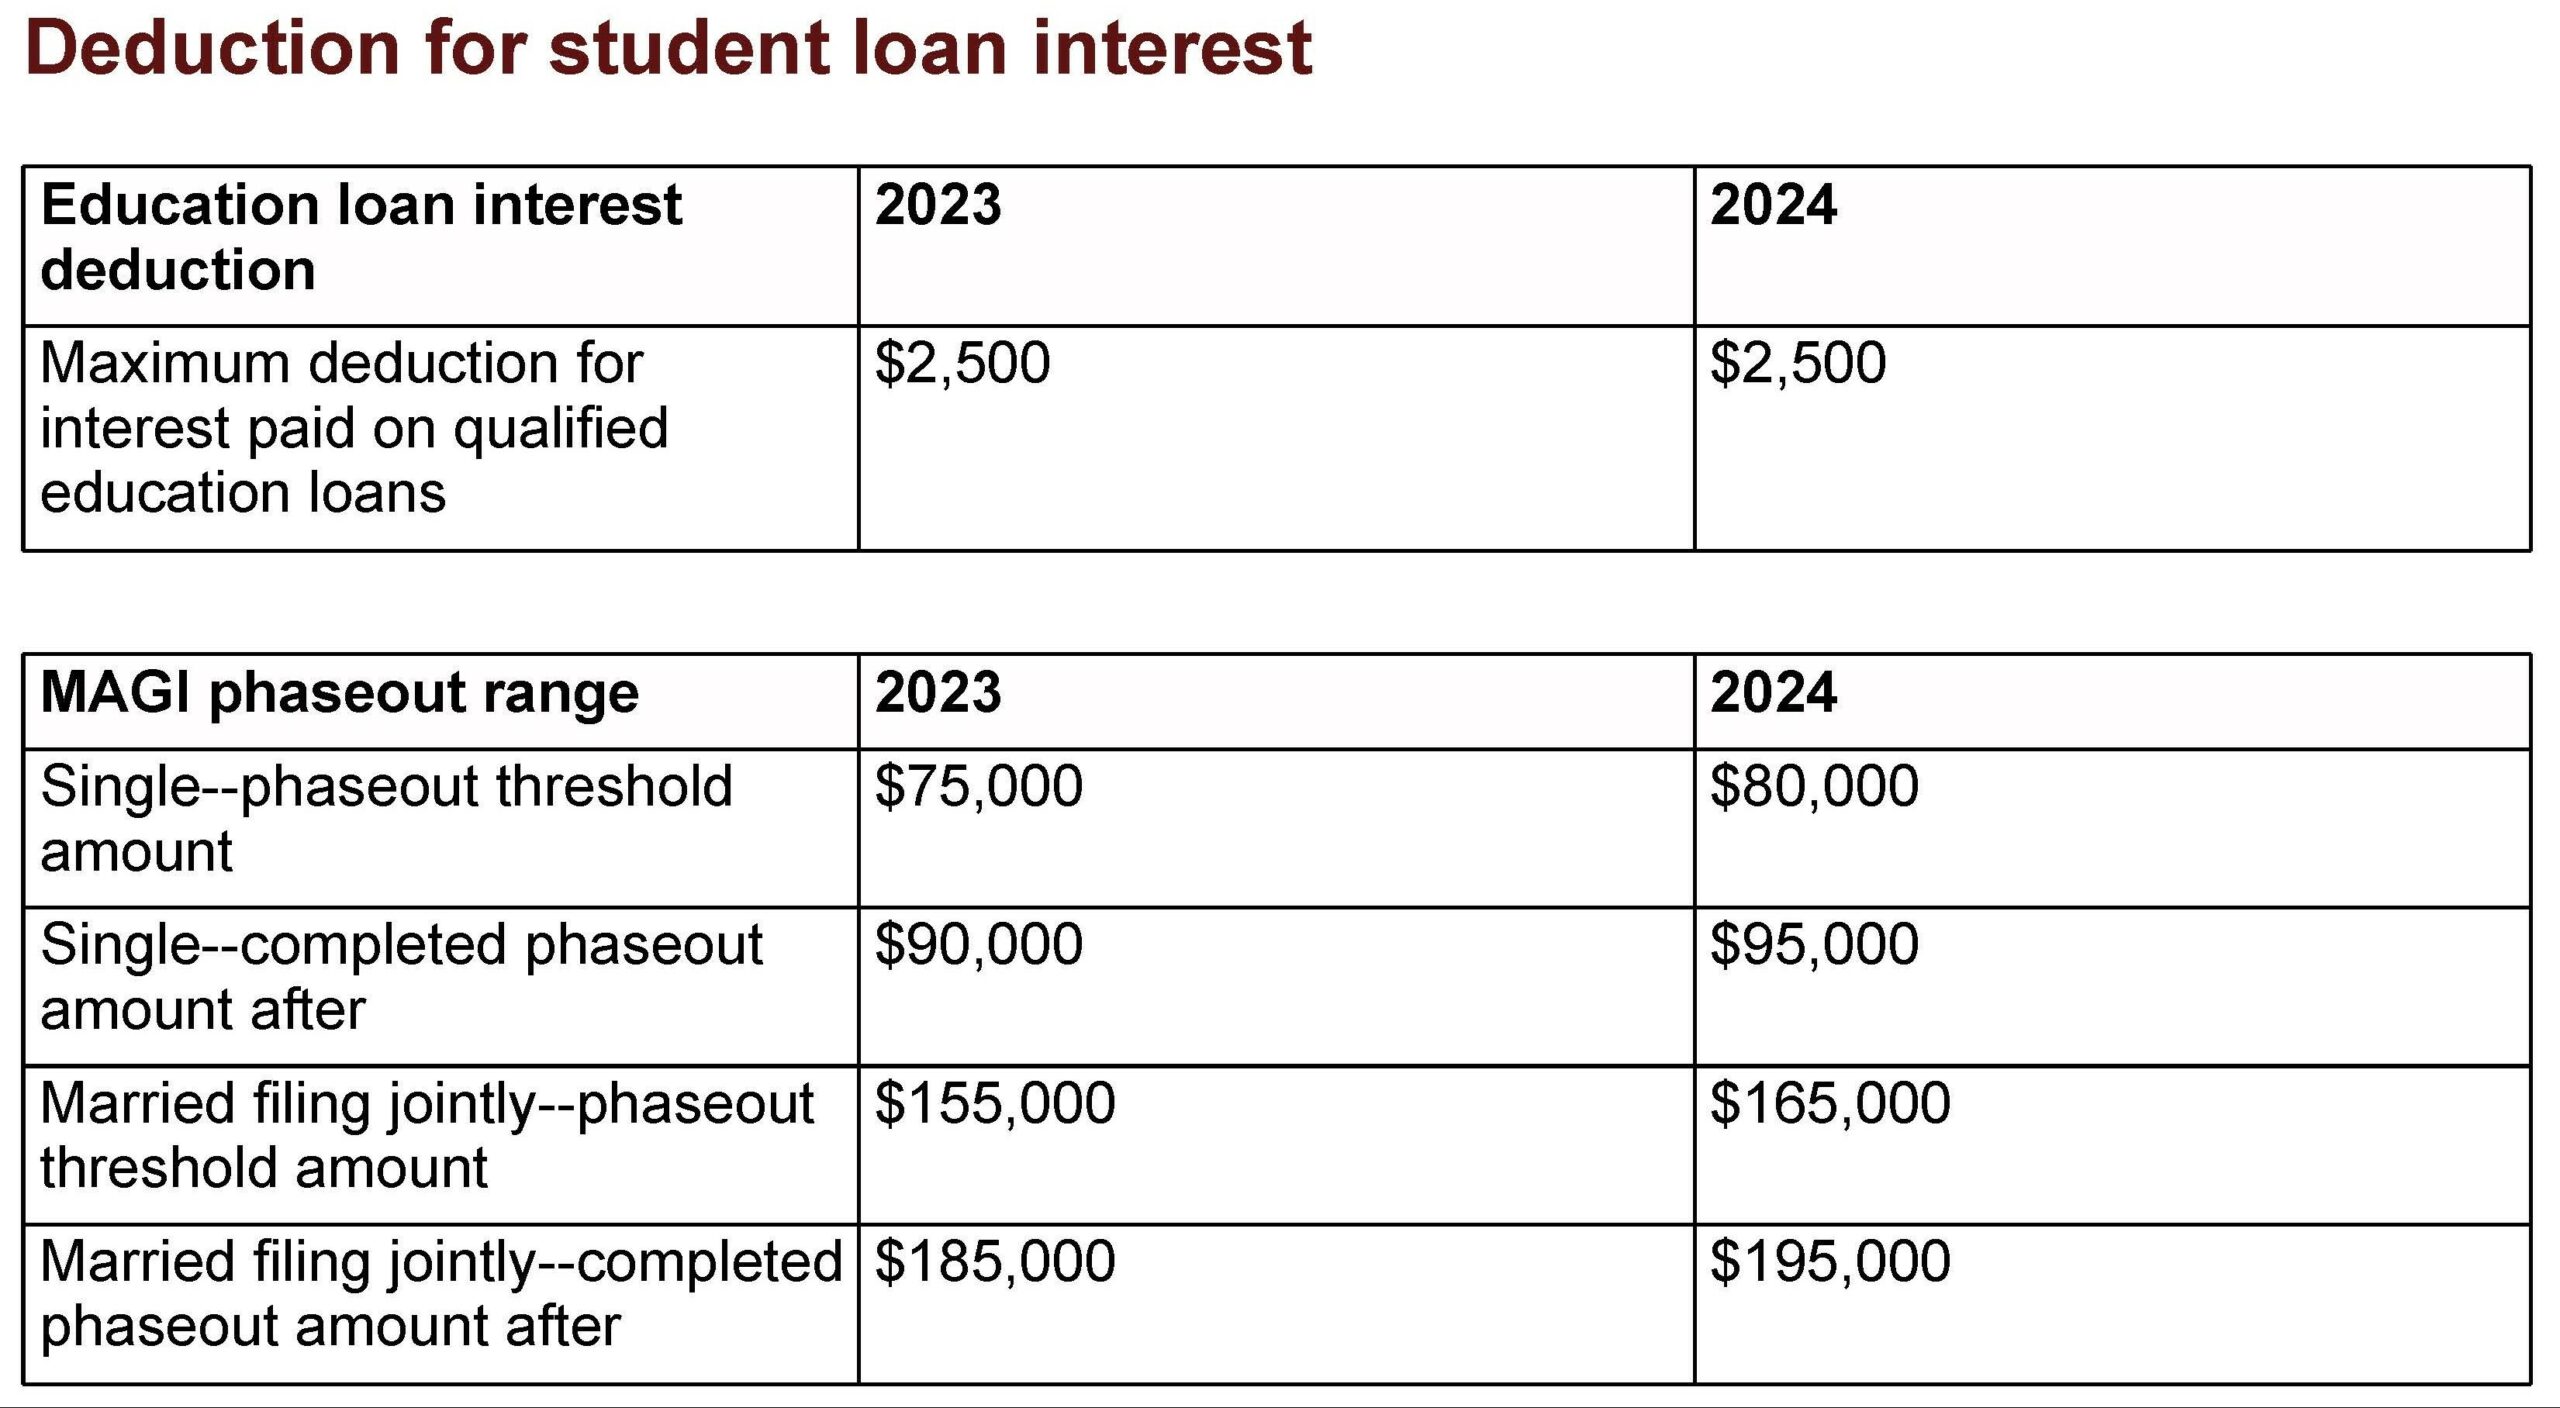 Deduction for student loan interest